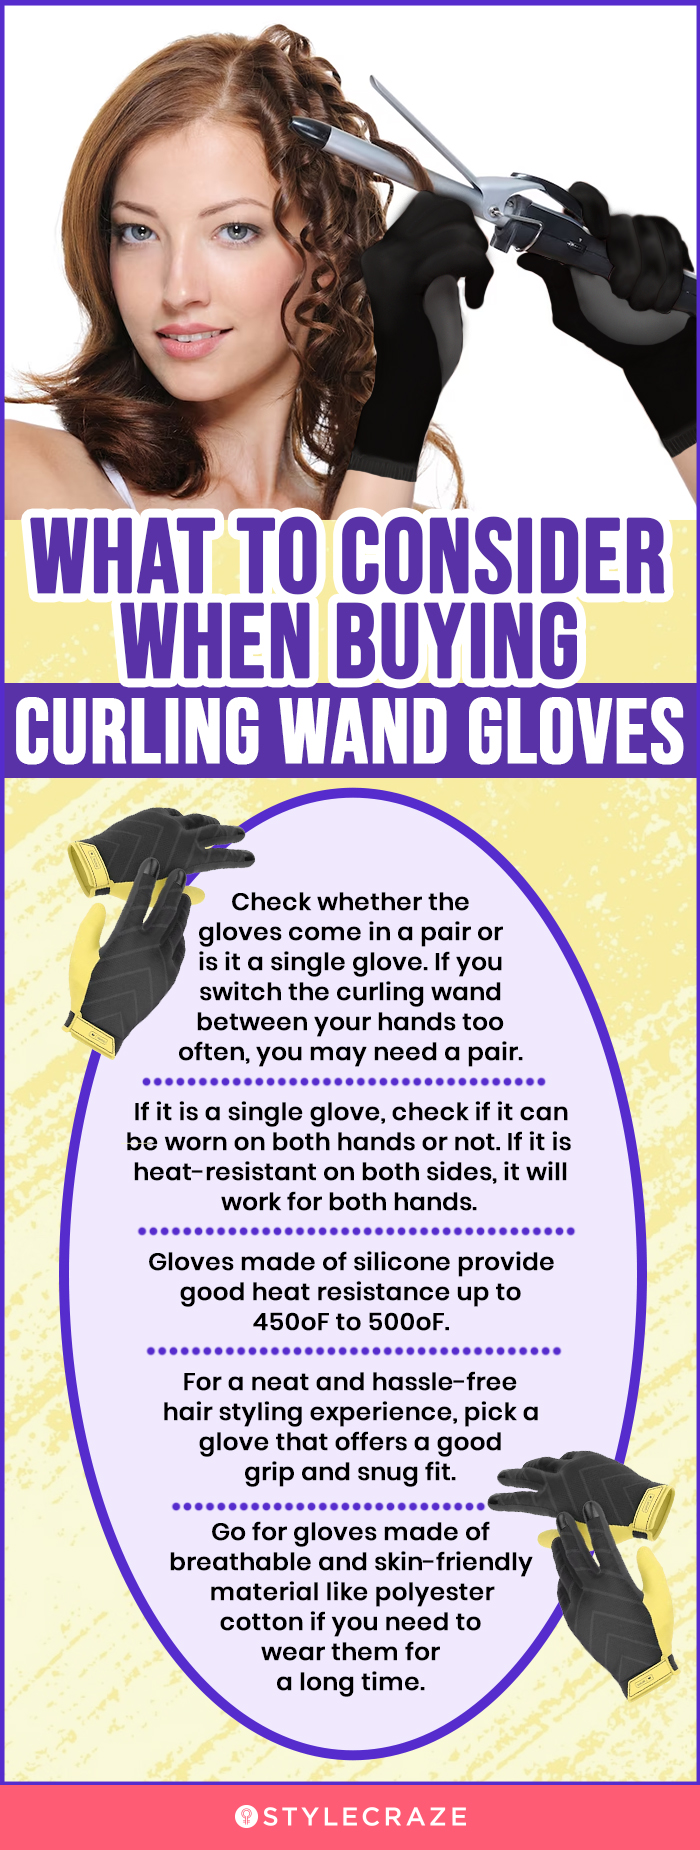 Points To Consider When Buying Curling Wand Glove (infographic)